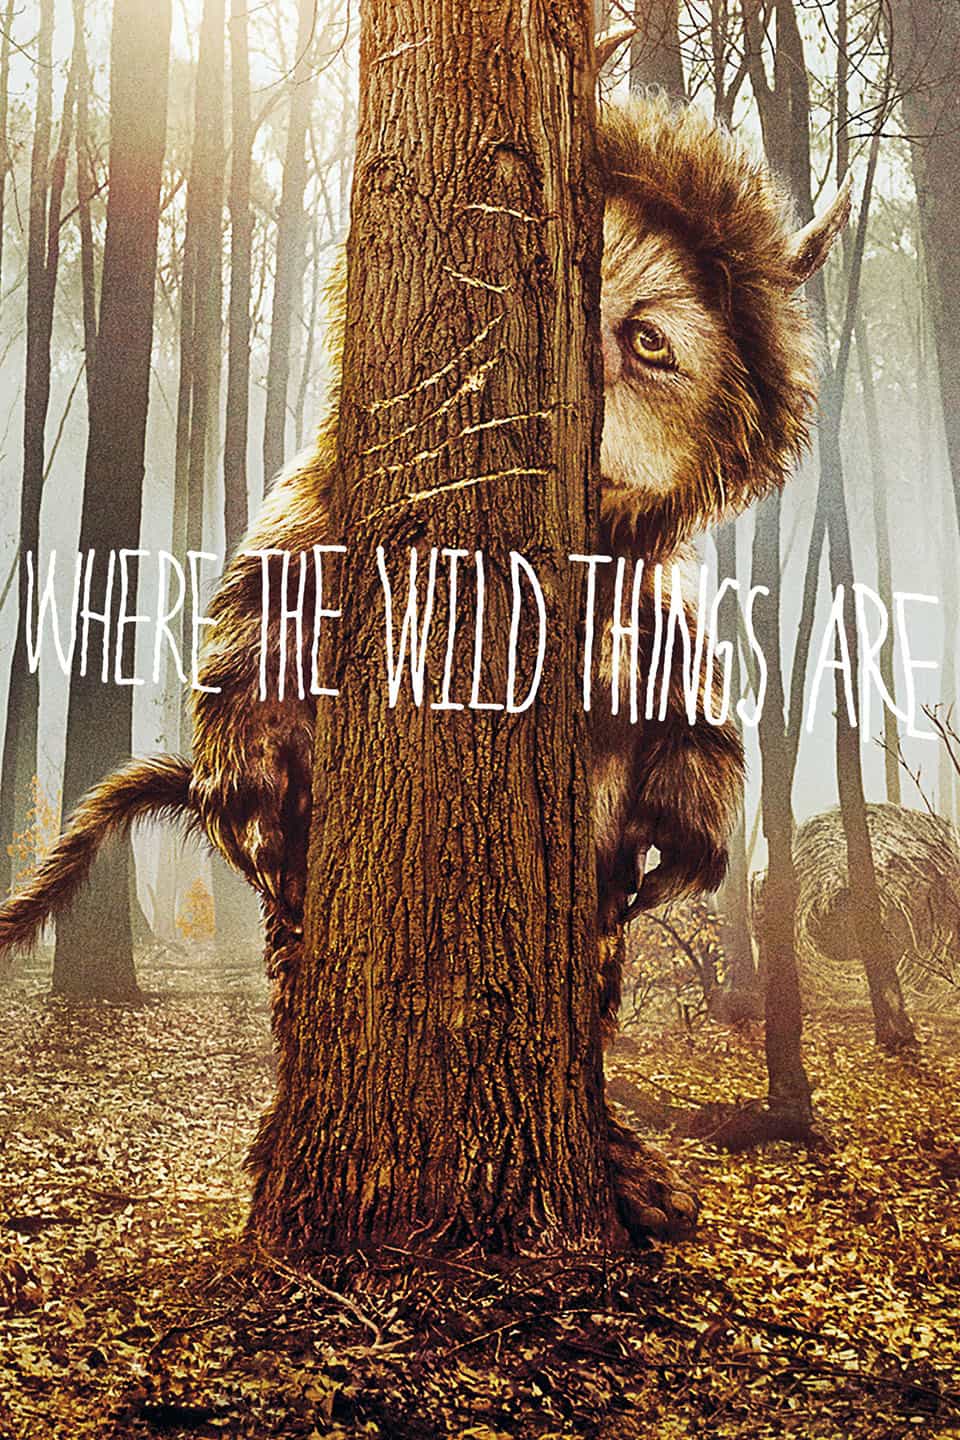 where the wild things are picture